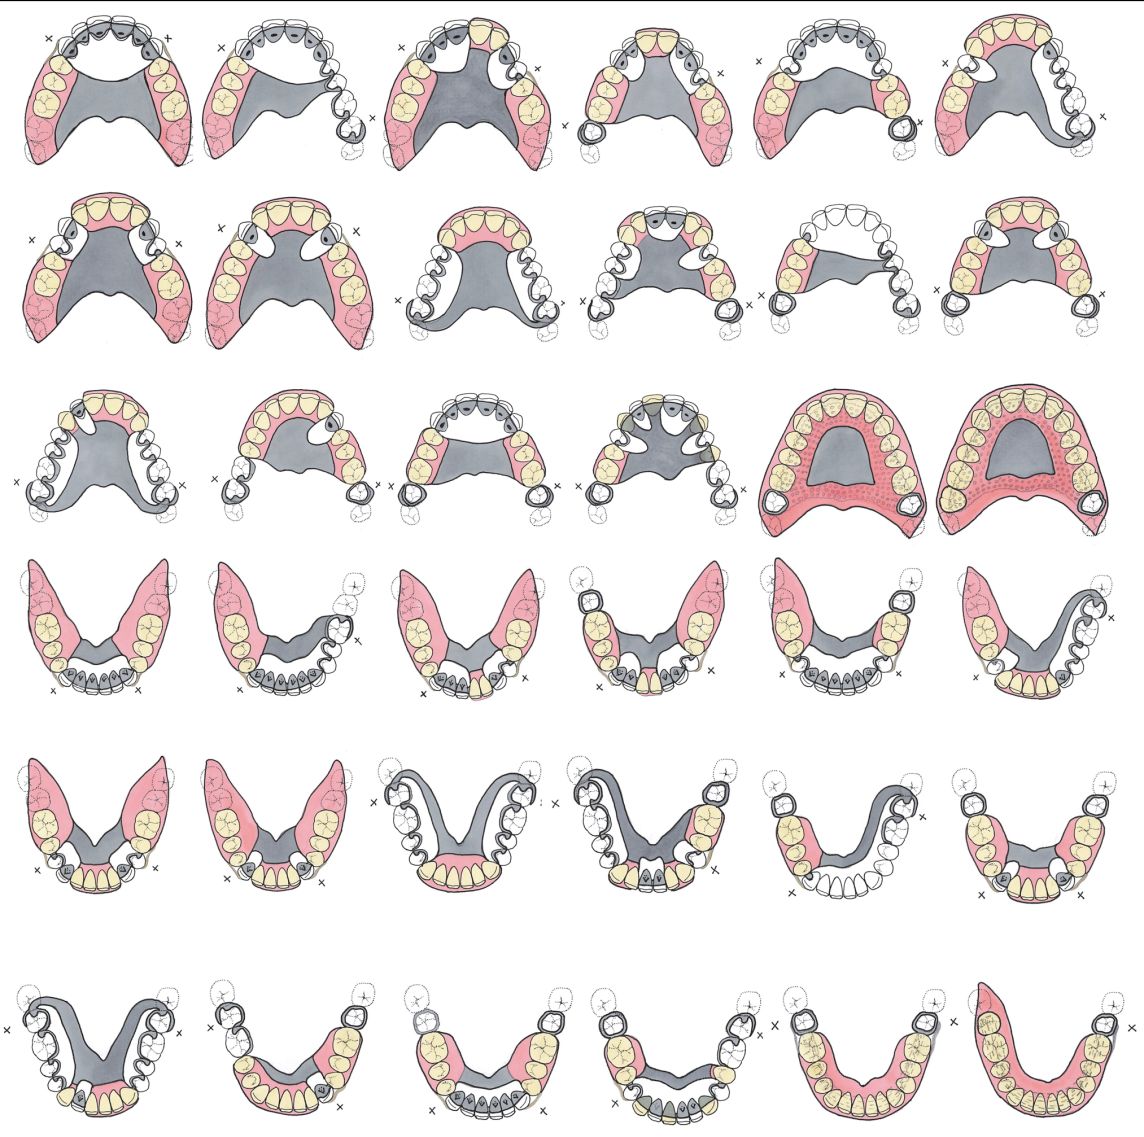 Aide memoire - for various combinations of missing upper teeth.